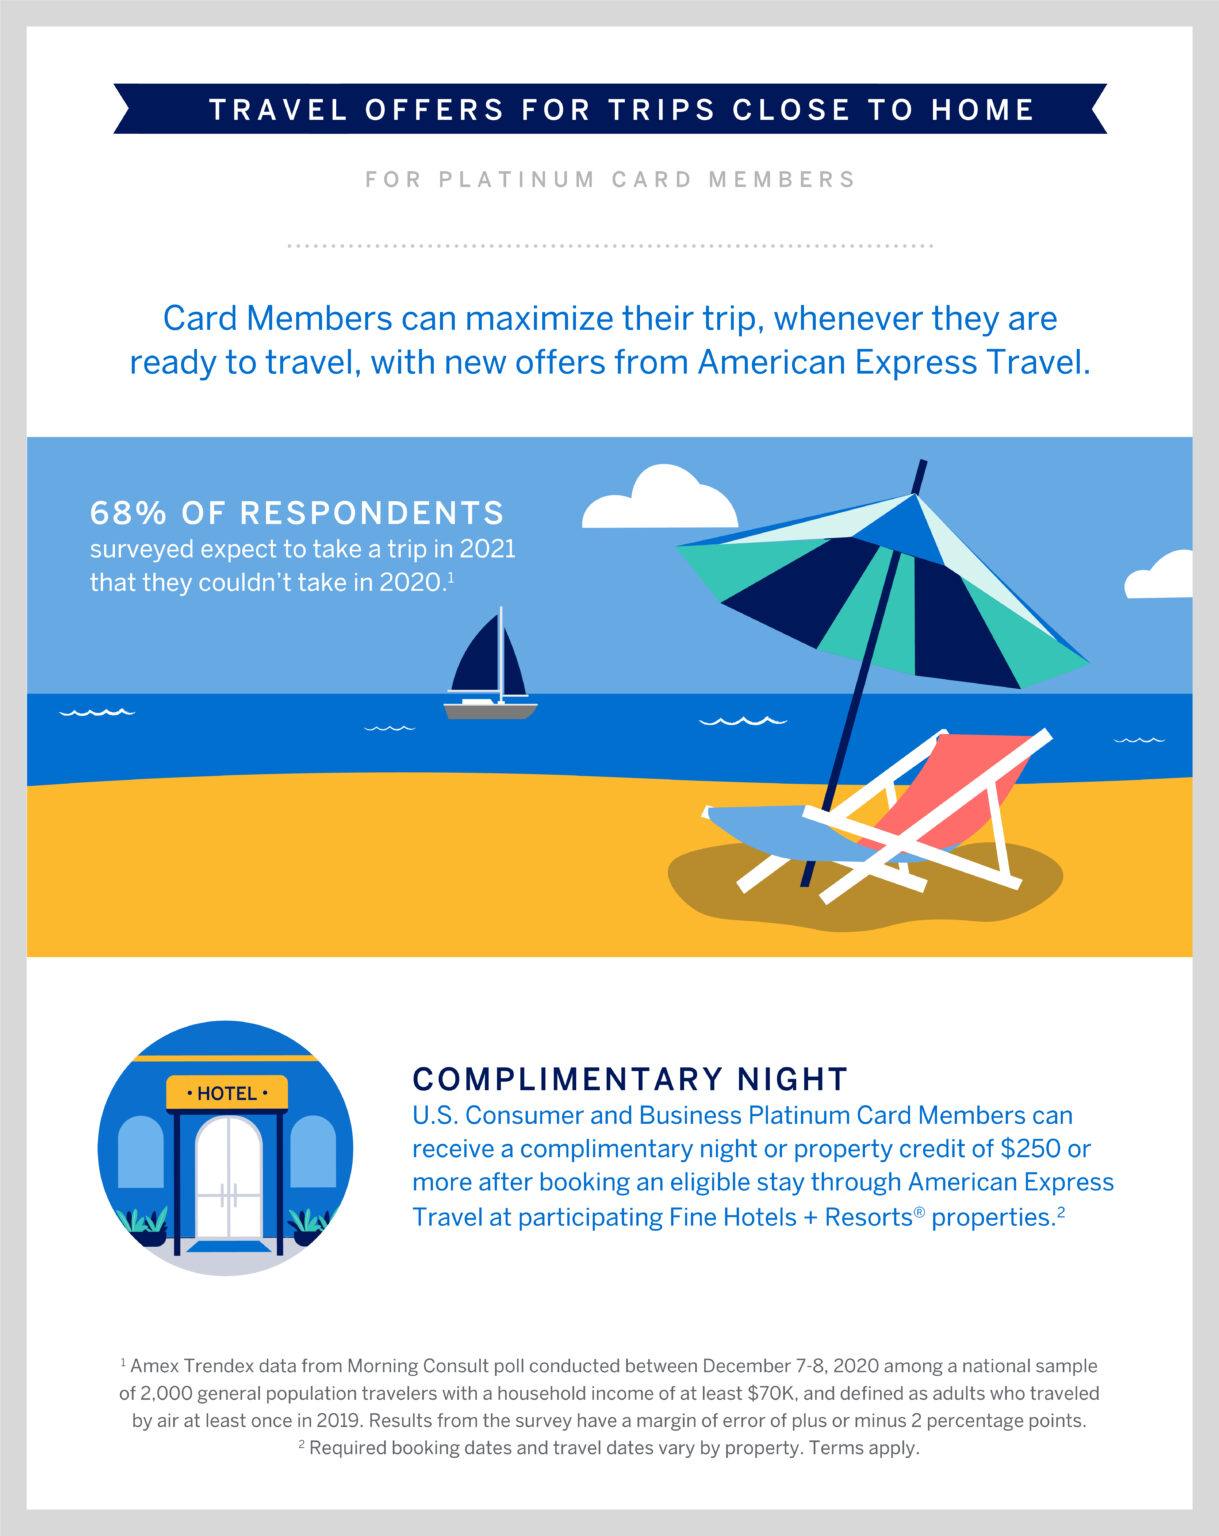 american express travel support